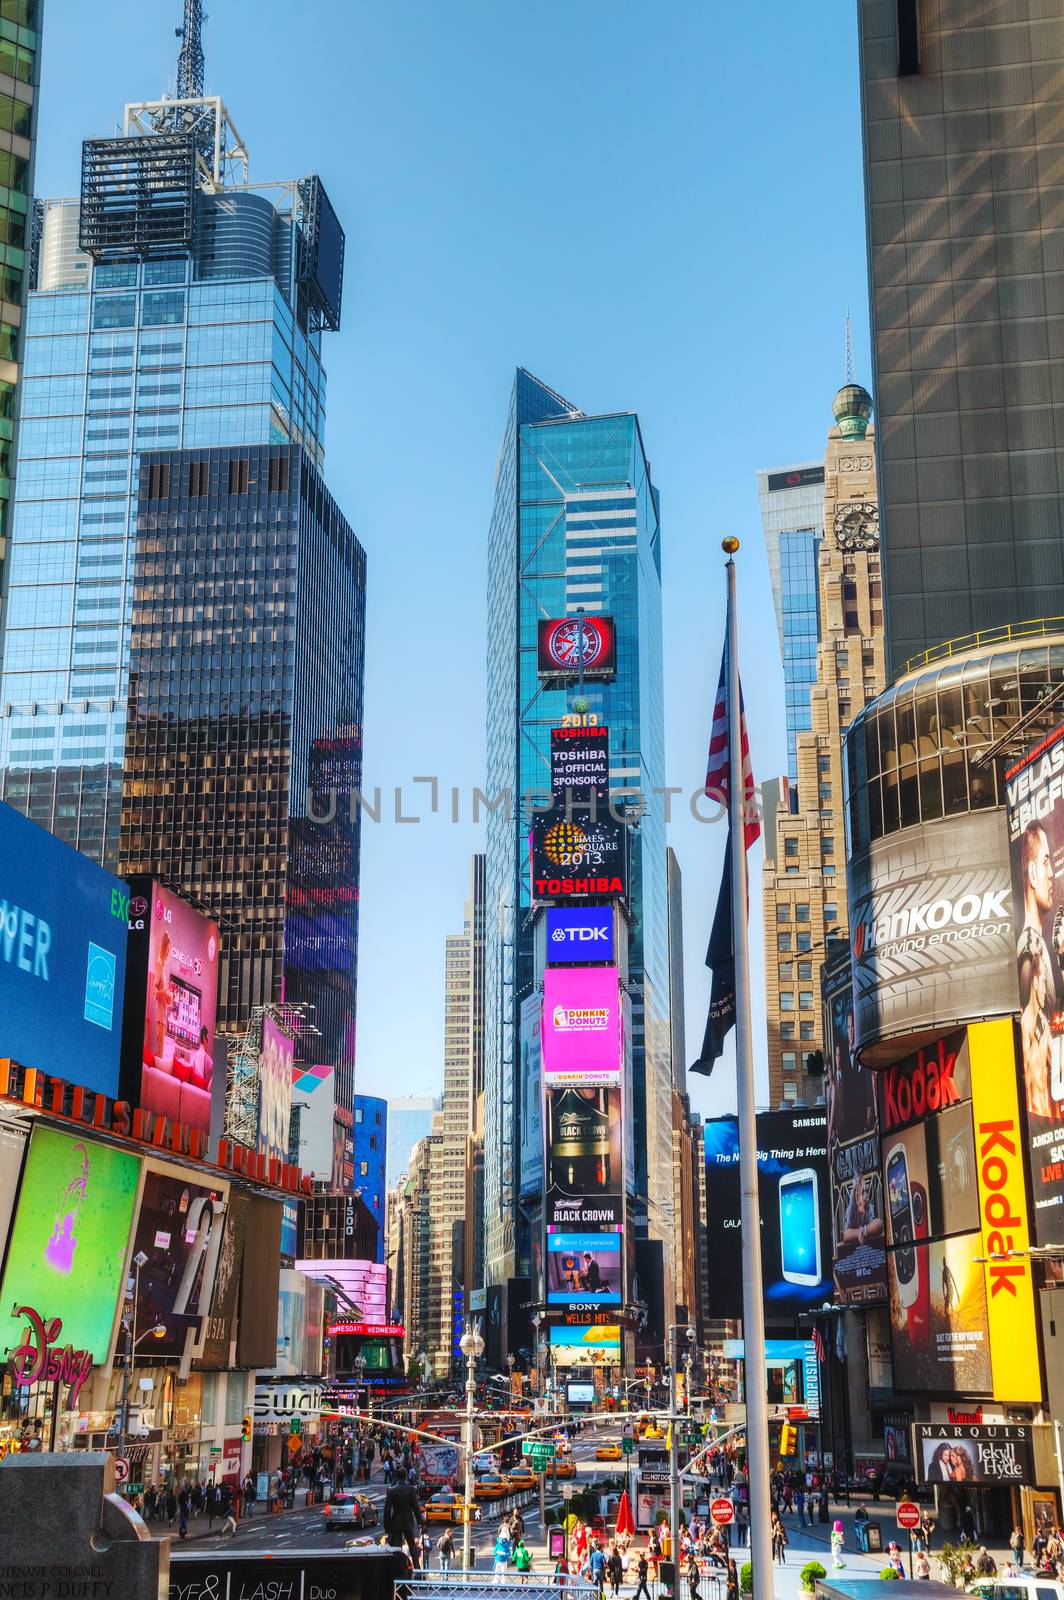 Times square in New York City by AndreyKr